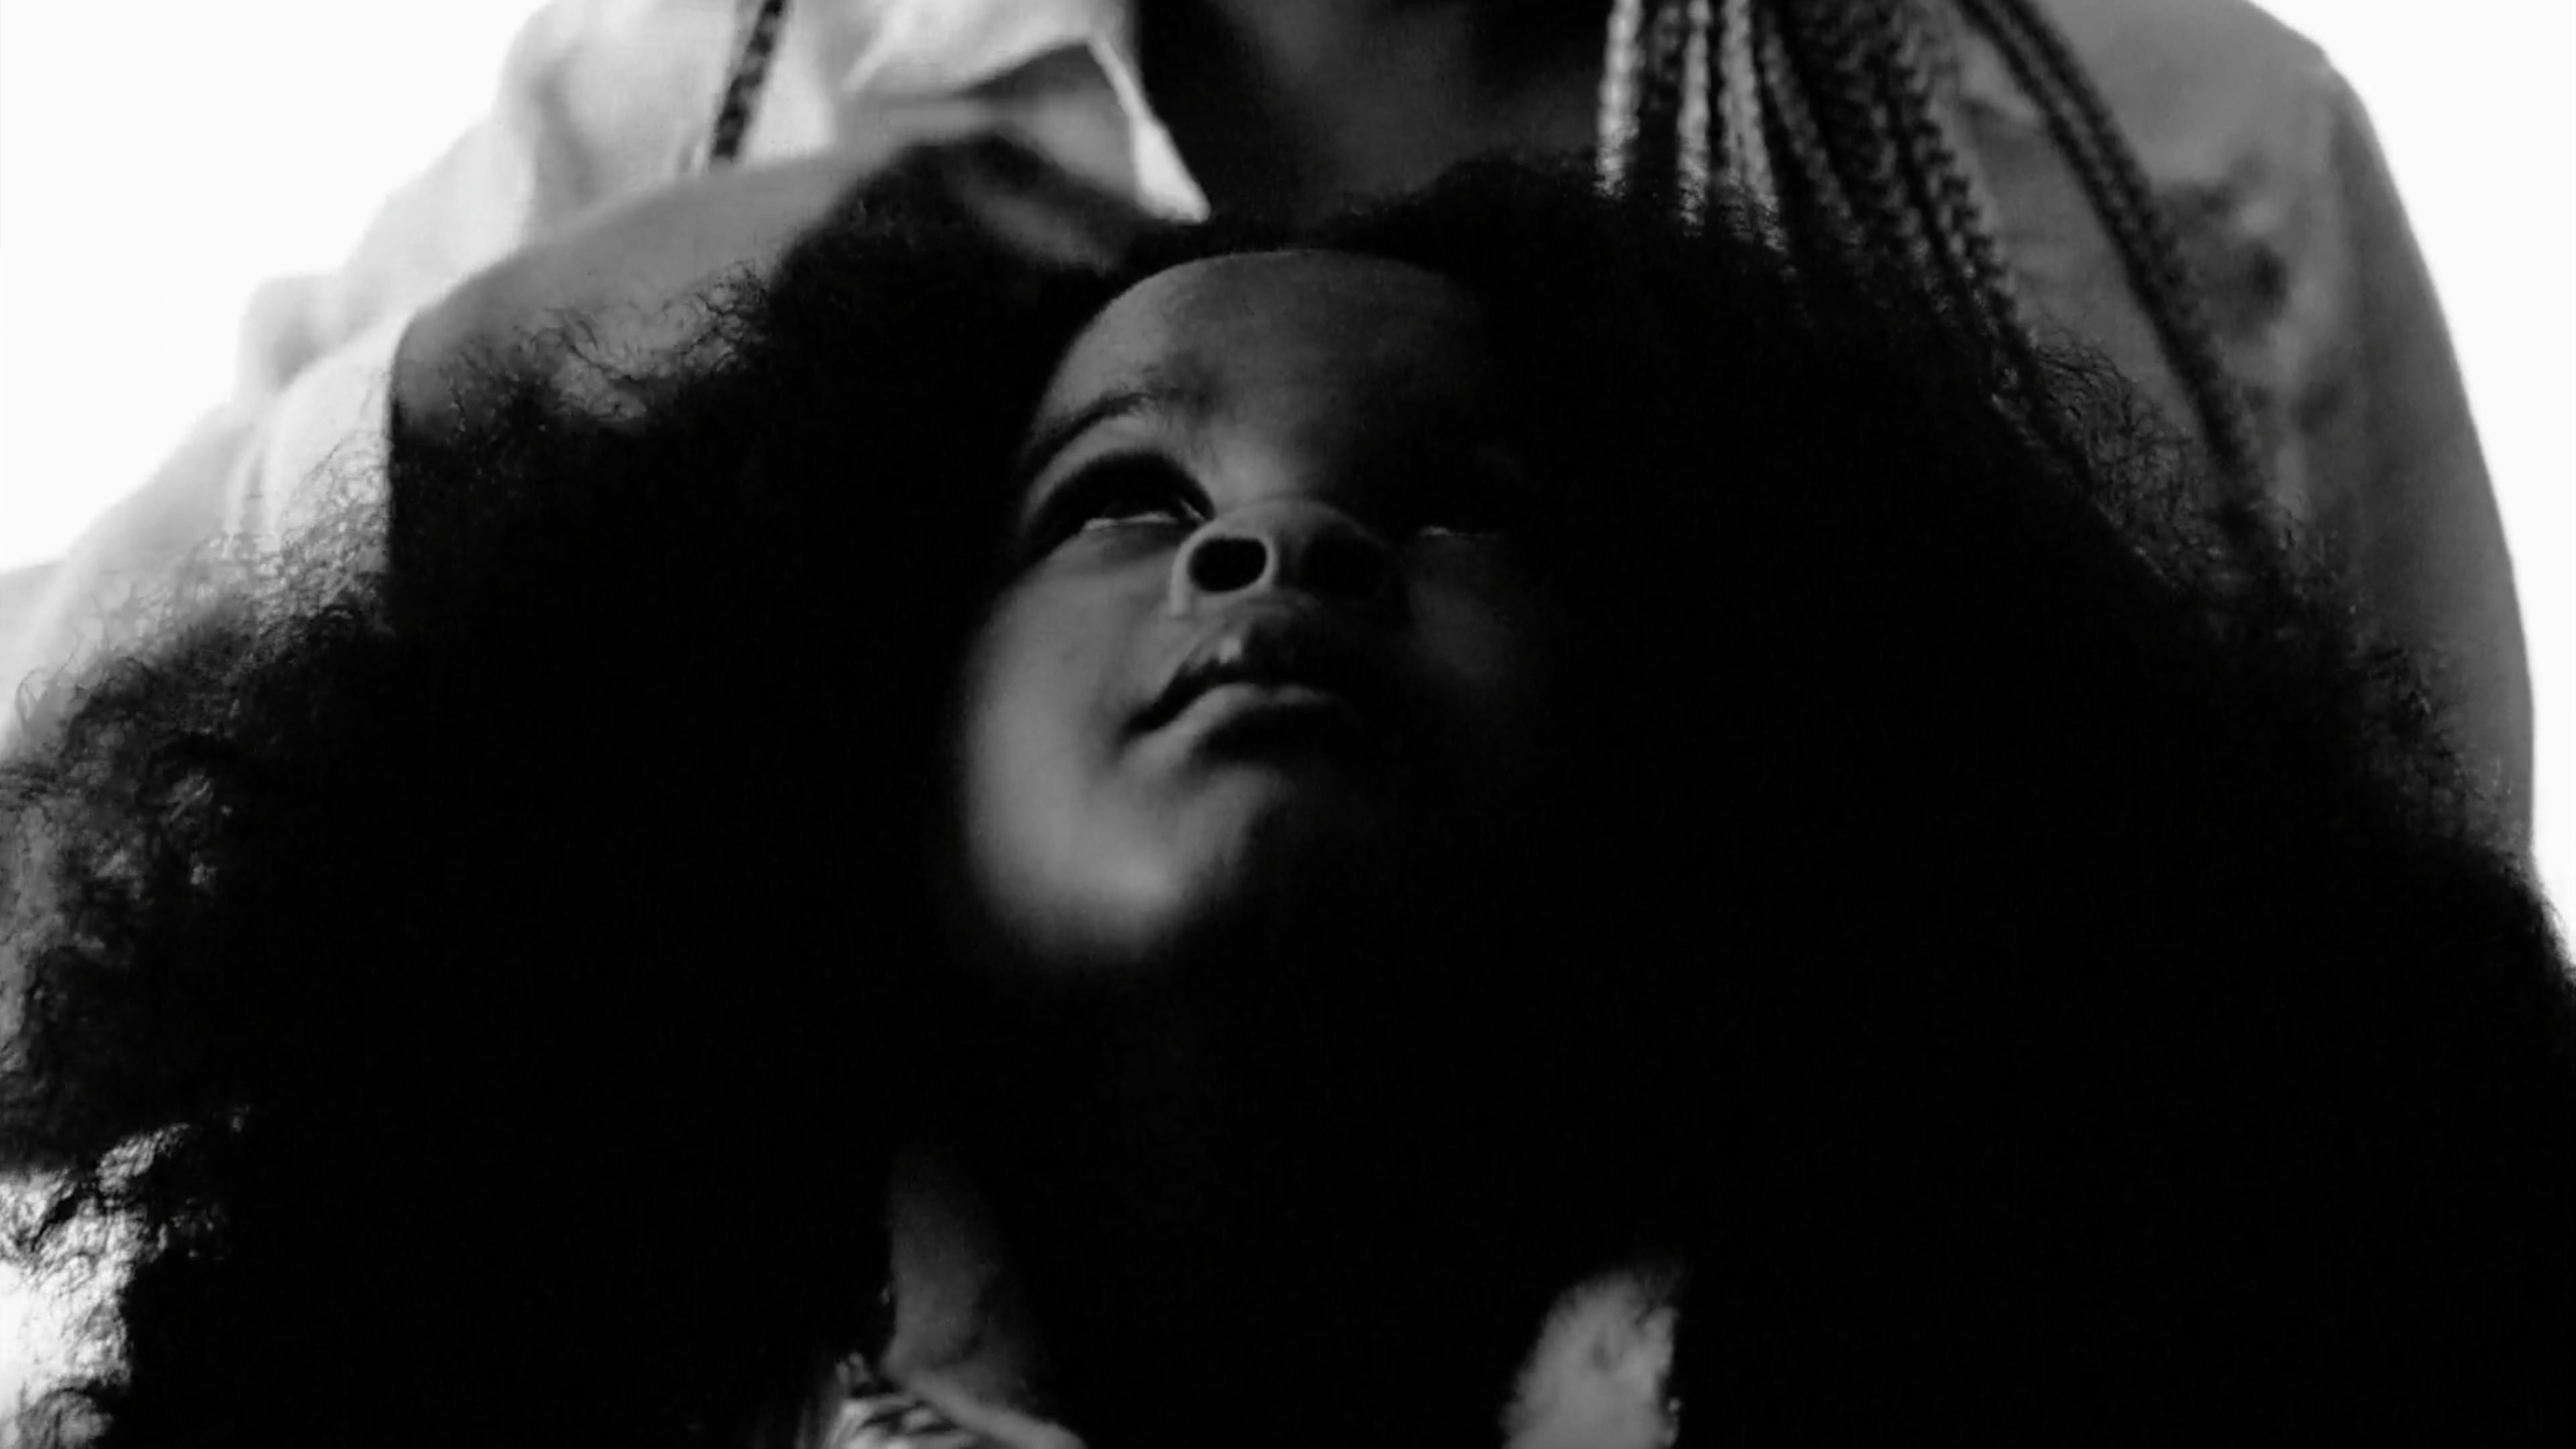 A black and white image of a child looking up while her hair is braided